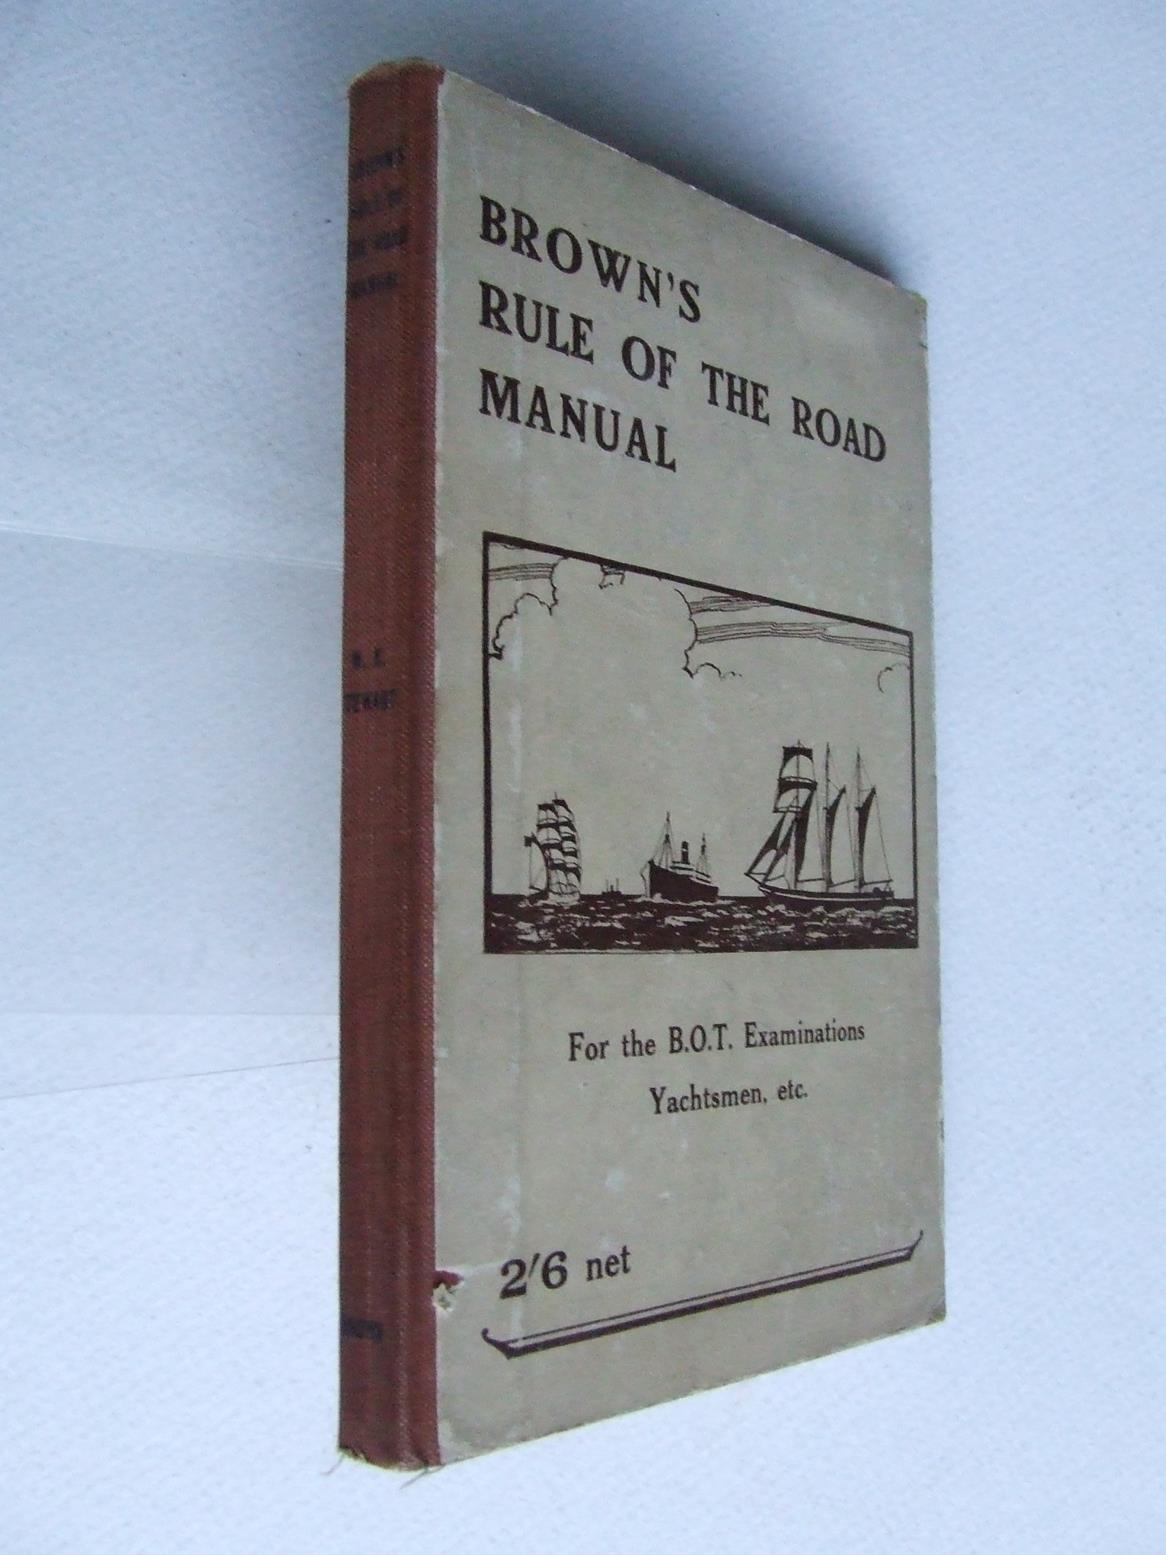 Brown's Rule of the Road Manual, the rule of the road at sea